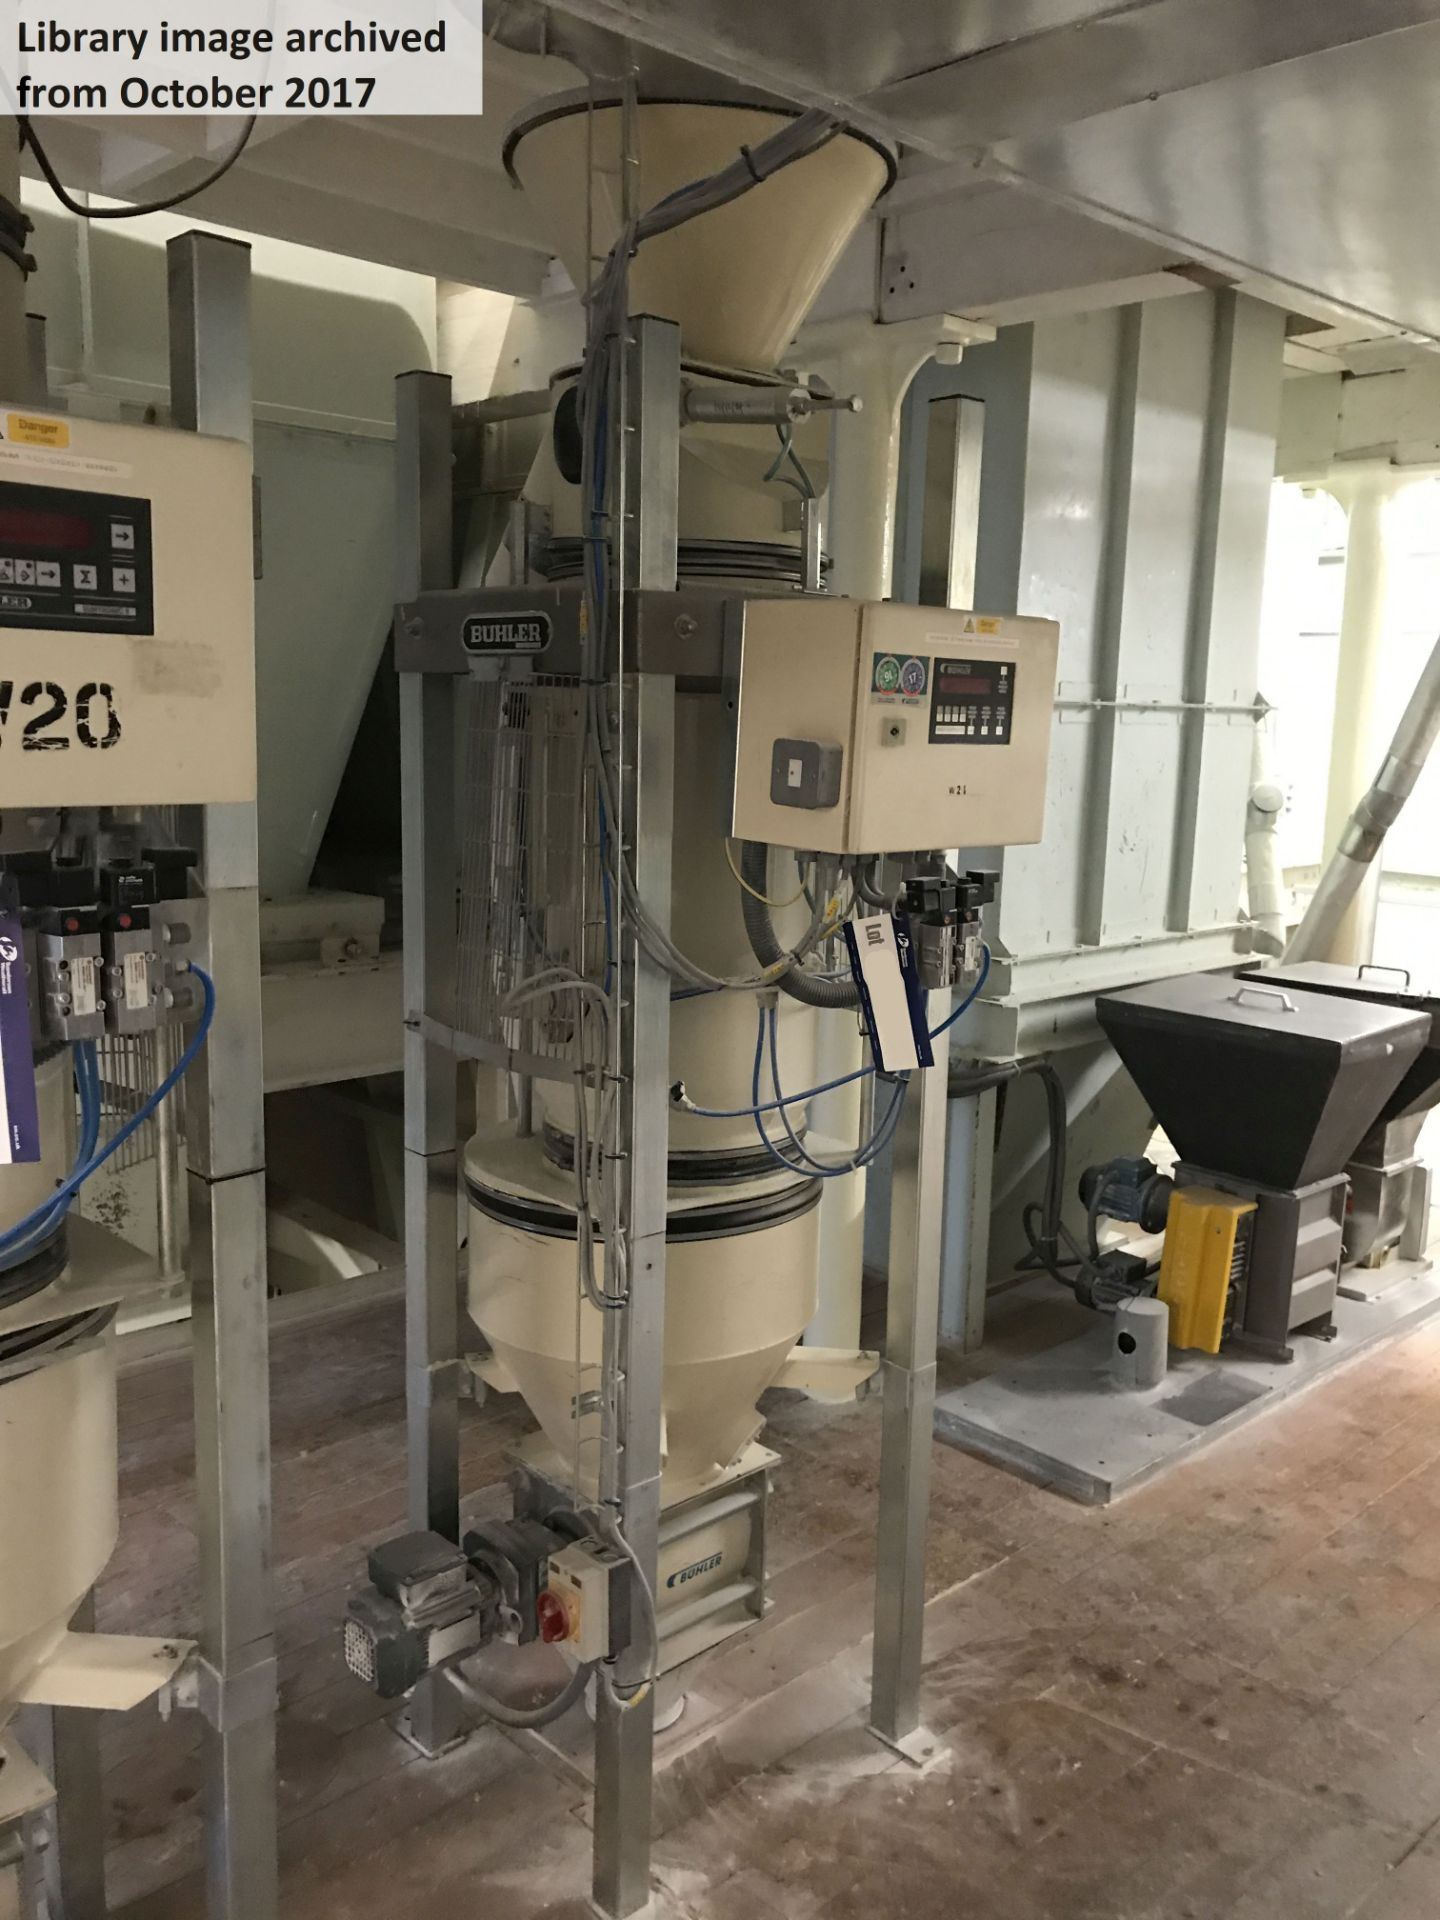 Buhler Process Weigher, serial no. 10174993 (W21), with MWEE Sumtronic II control and Buhler